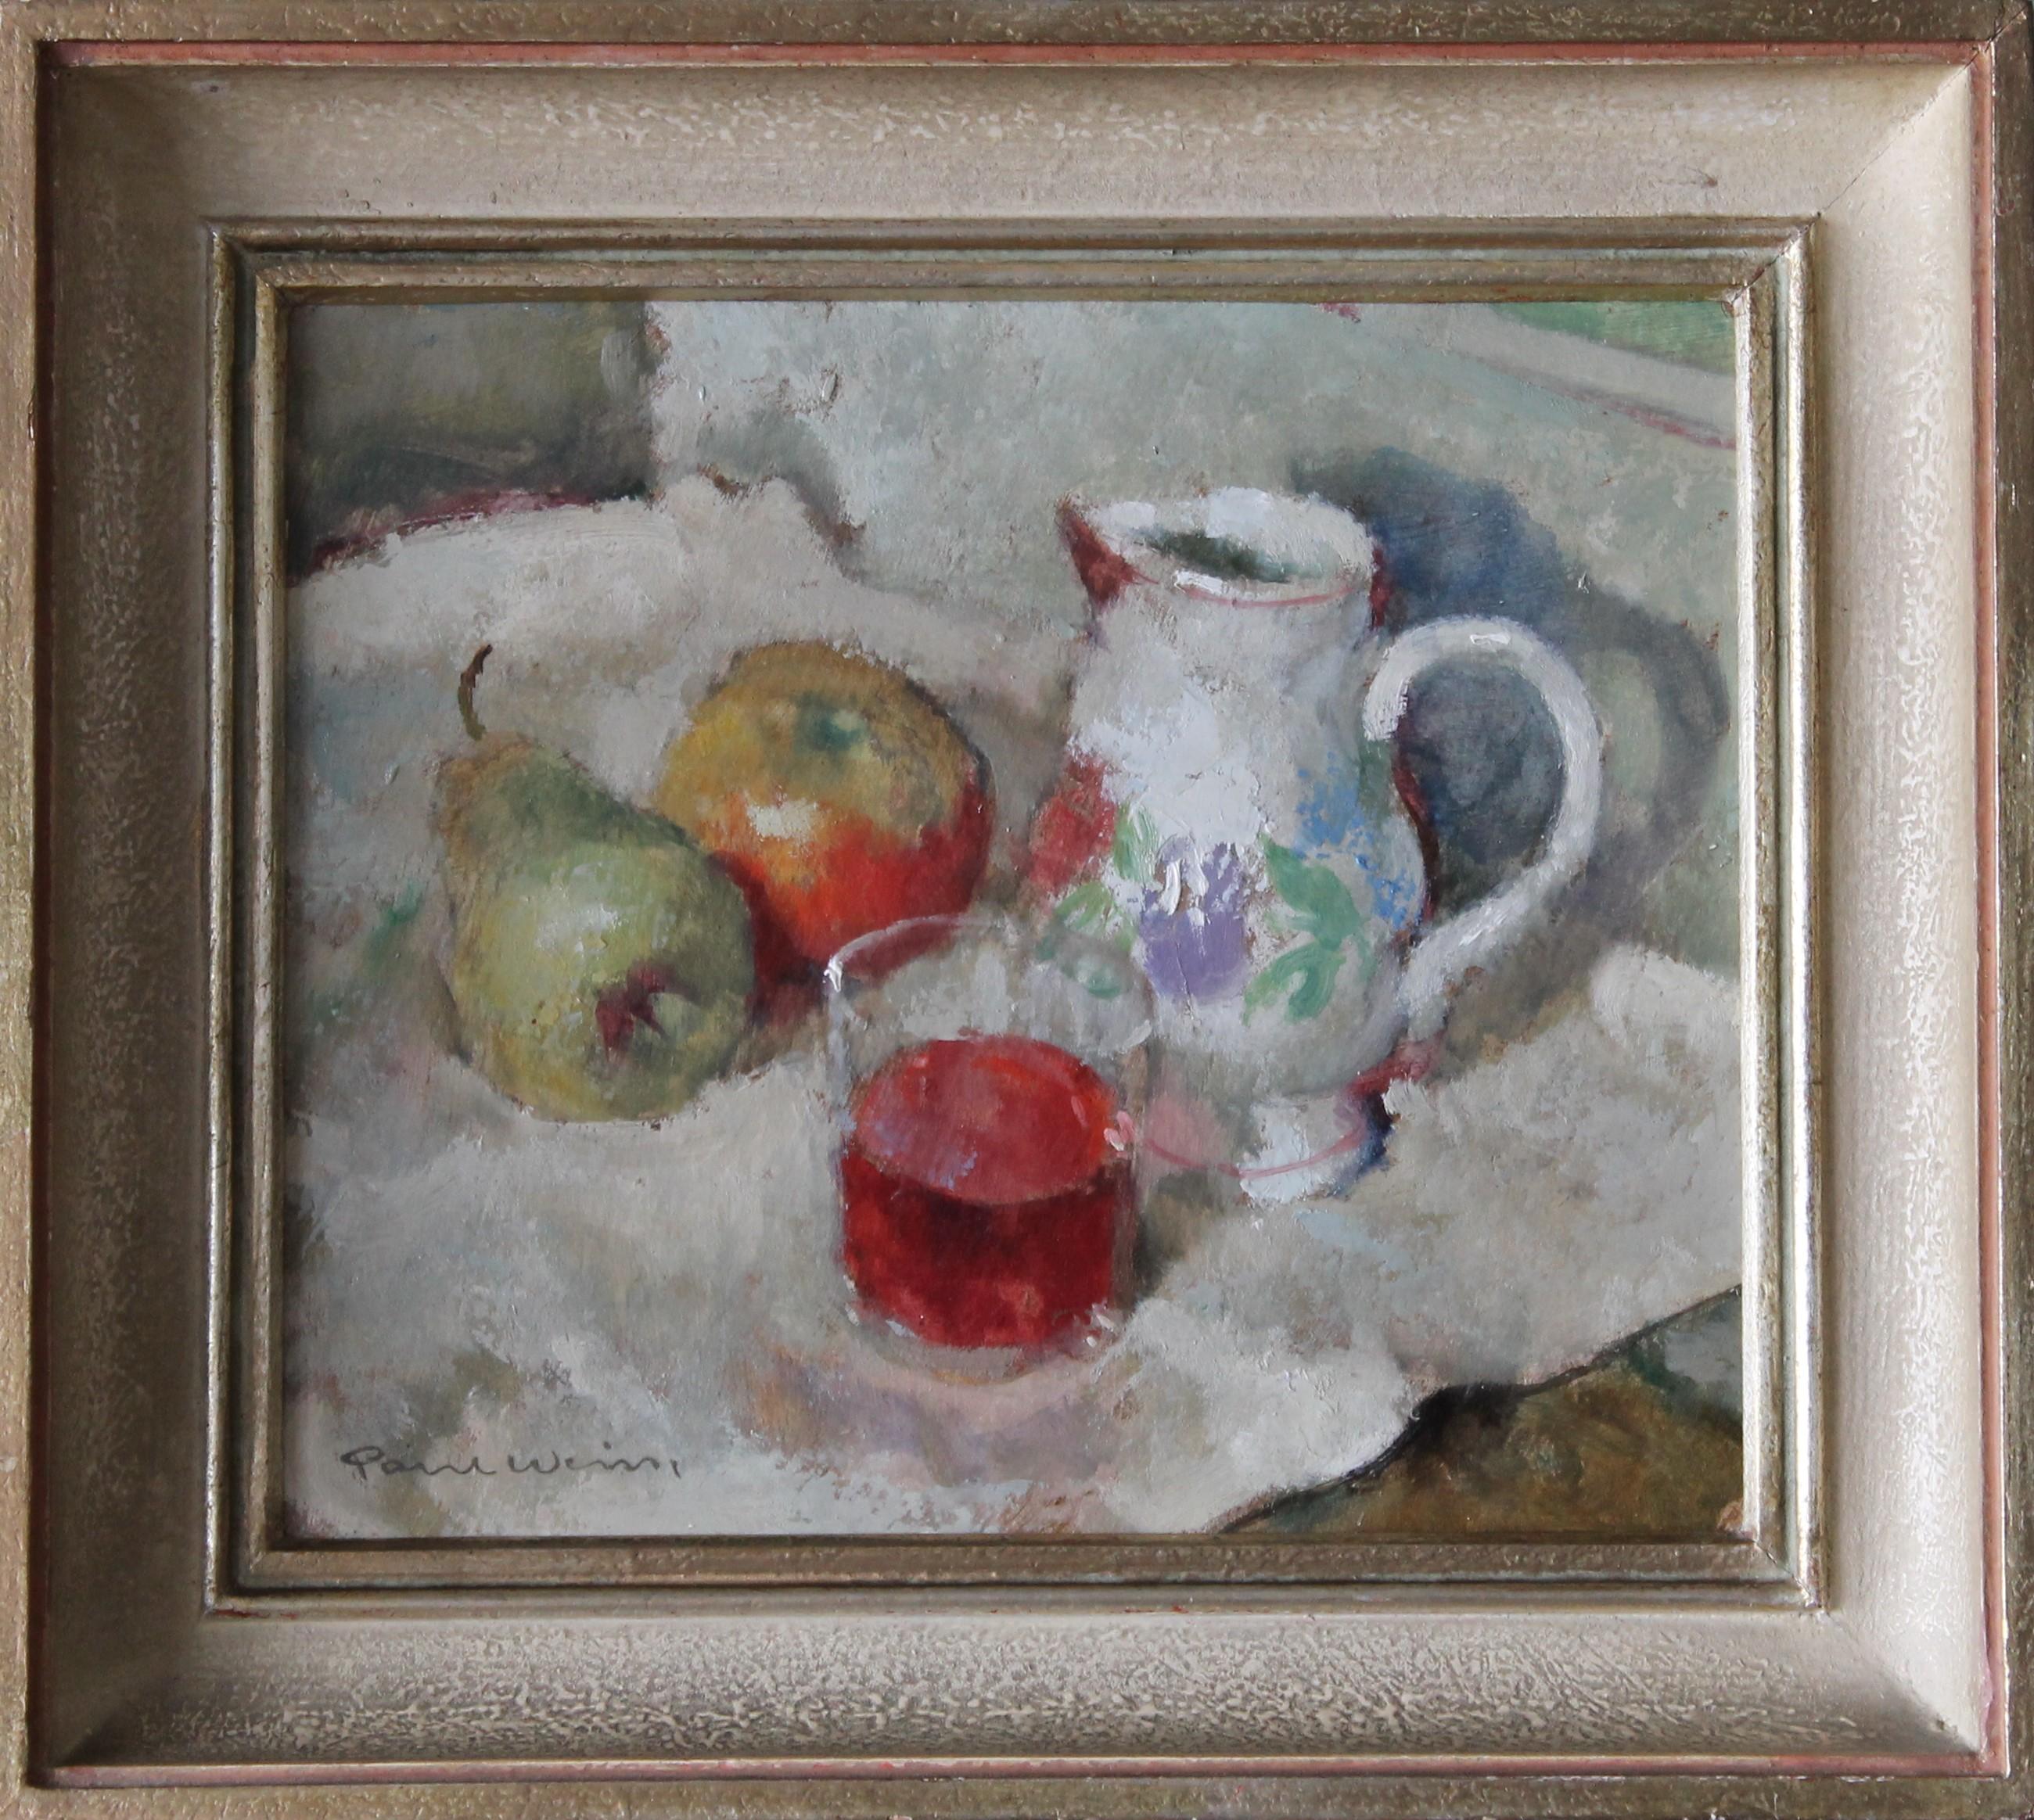 French vintage still life oil painting on cardboard by Paul Weiss (1896-1961), signed in the bottom left corner.  Very pretty still life in its original frame.  A light interesting background with movement sets off this still life painting.  The